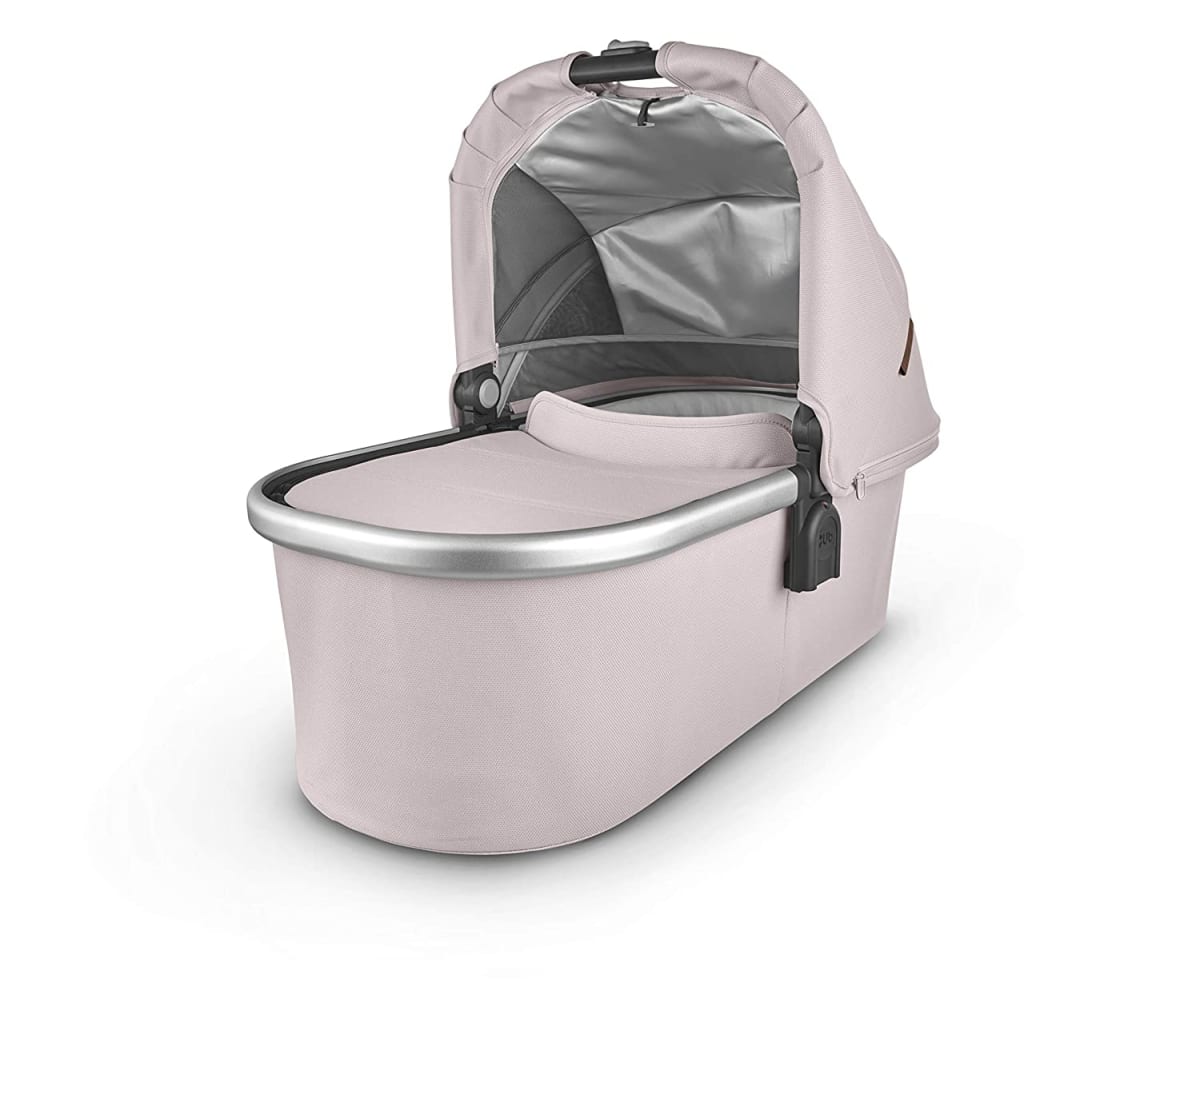 Bassinet - Alice (Dusty Pink/Silver/Saddle Leather)